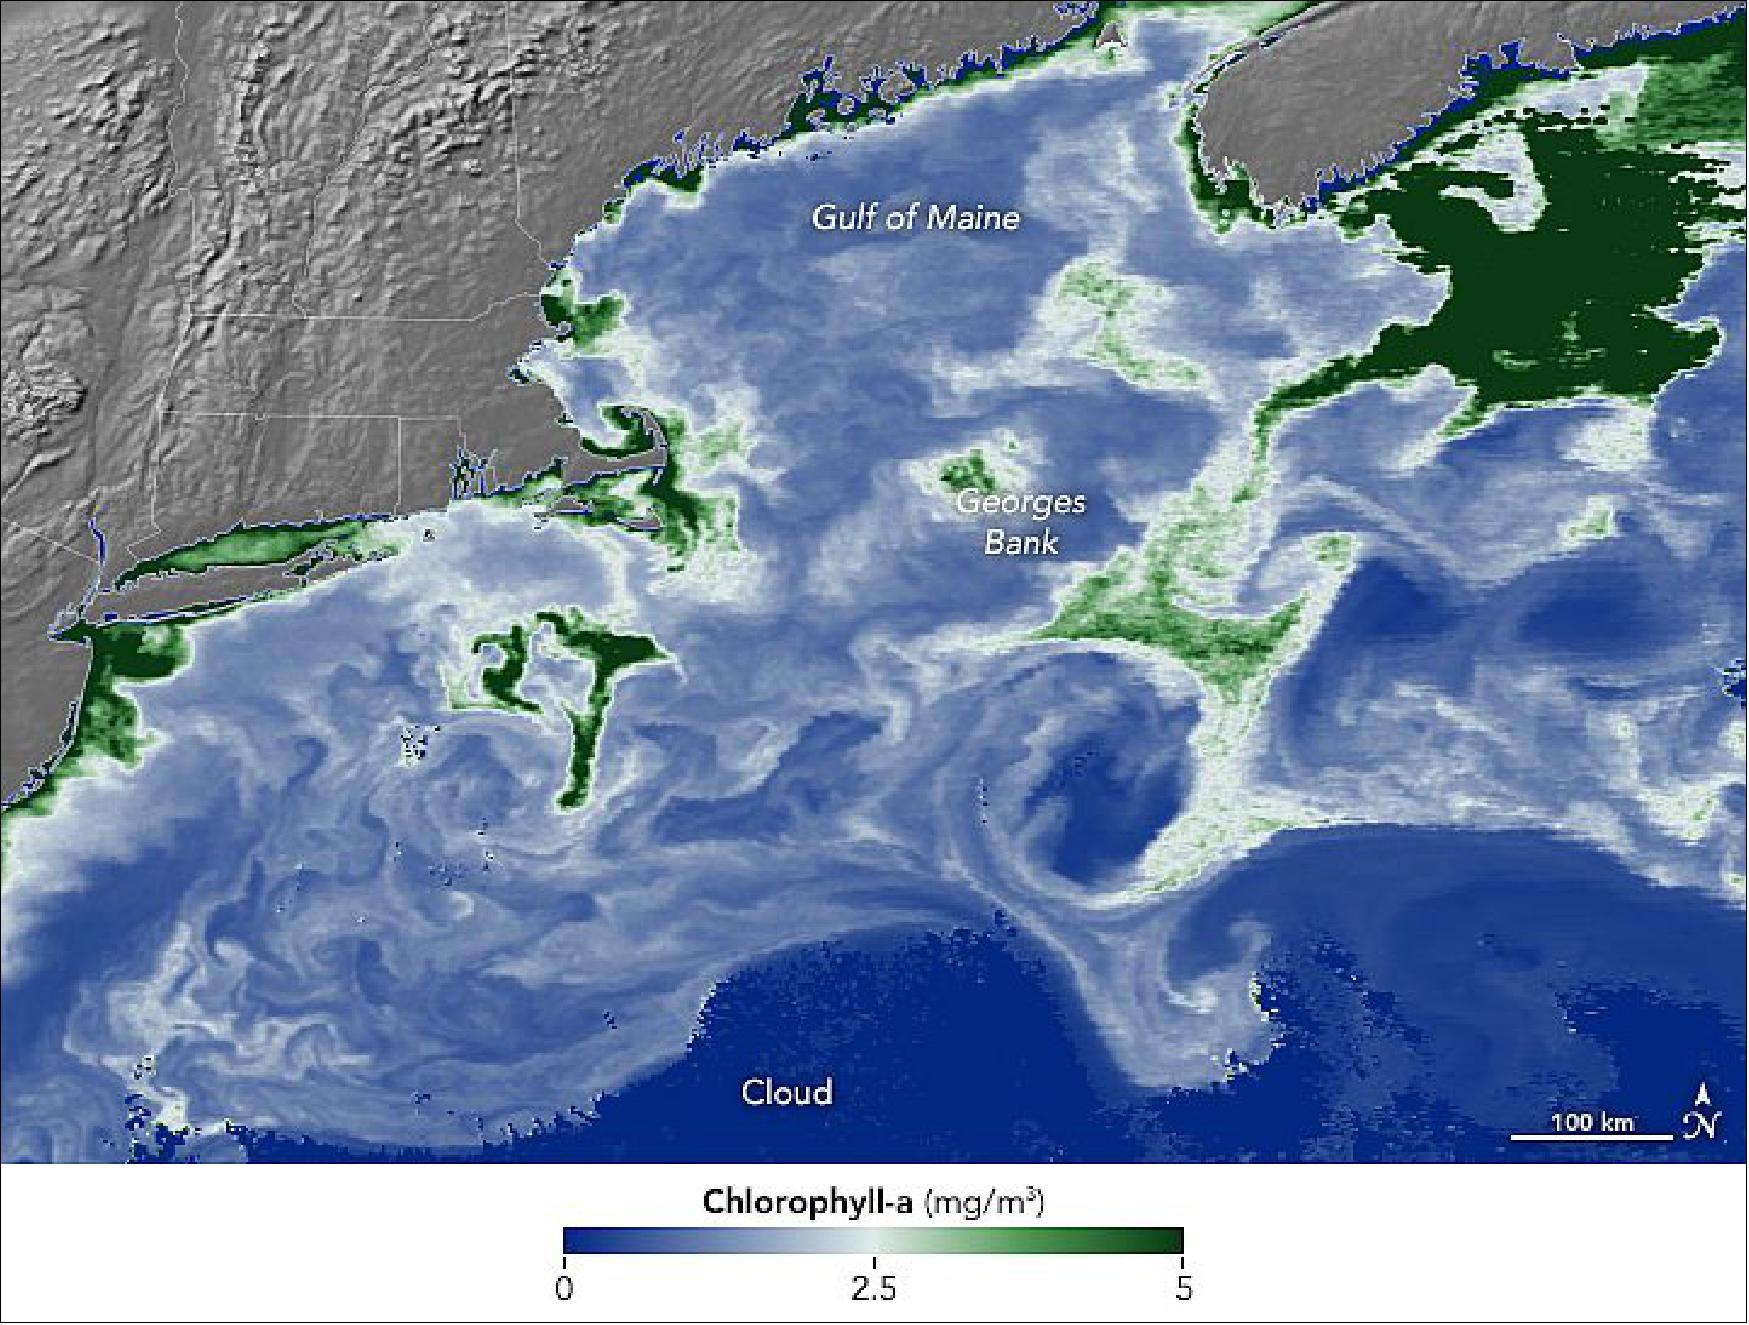 Figure 43: Data for the image were collected by Aqua MODIS on March 30, 2021. The image shows concentrations of chlorophyll-a in the North Atlantic Ocean from New Jersey to Nova Scotia; the darkest shades of green show areas with the greatest chlorophyll concentrations (image credit: NASA Earth Observatory images by Lauren Dauphin, using MODIS data from NASA EOSDIS LANCE and GIBS/Worldview. Story by Michael Carlowicz)